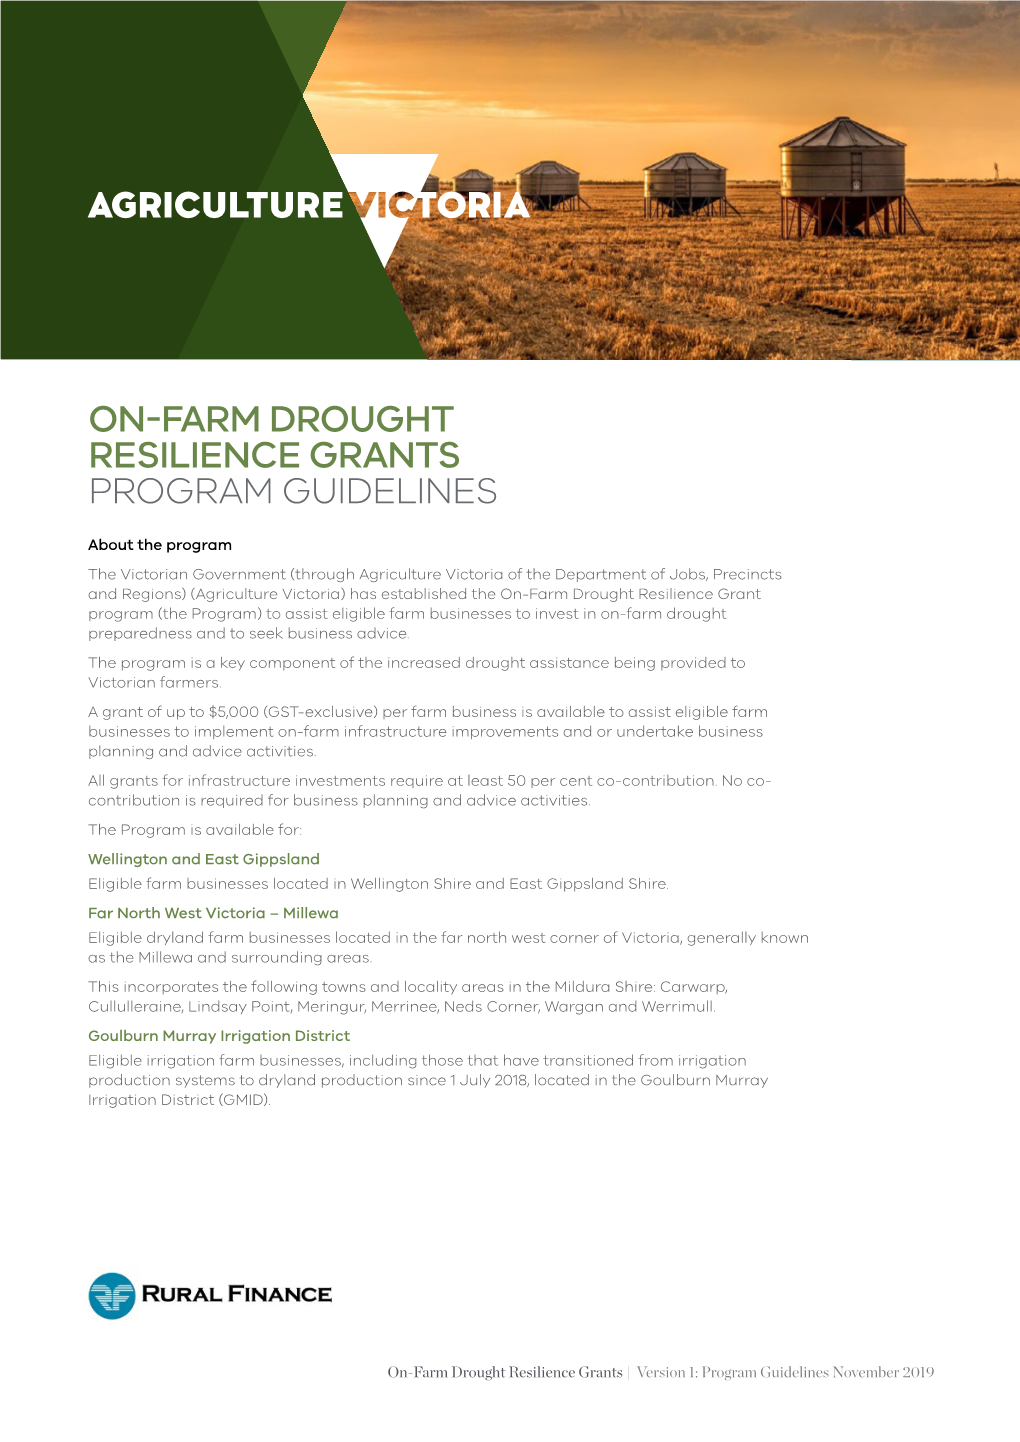 On-Farm Drought Resilience Grants Program Guidelines